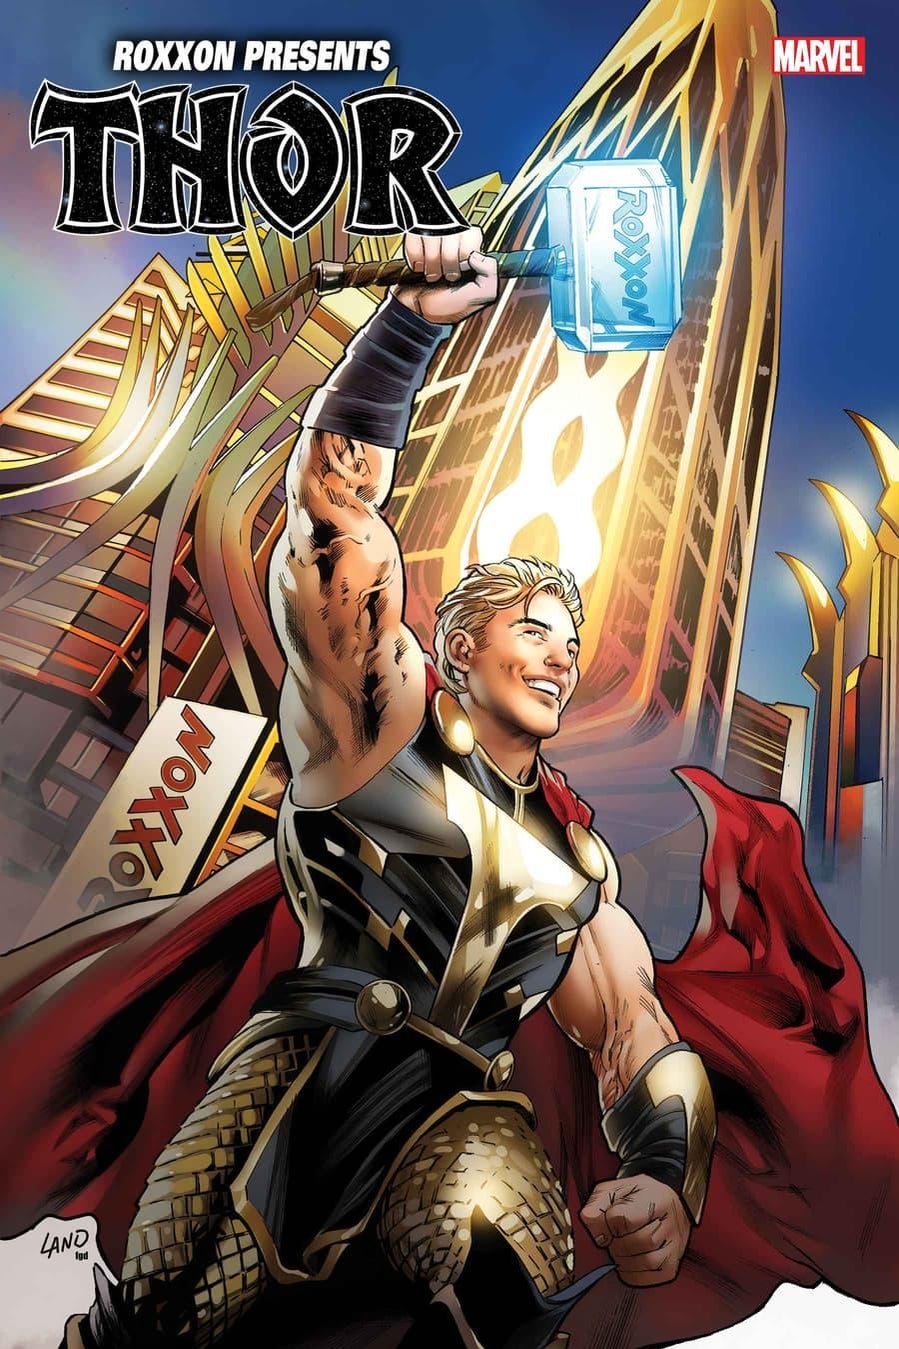 Marvel Introduces Chad Hammer, The Roxxin' Thor